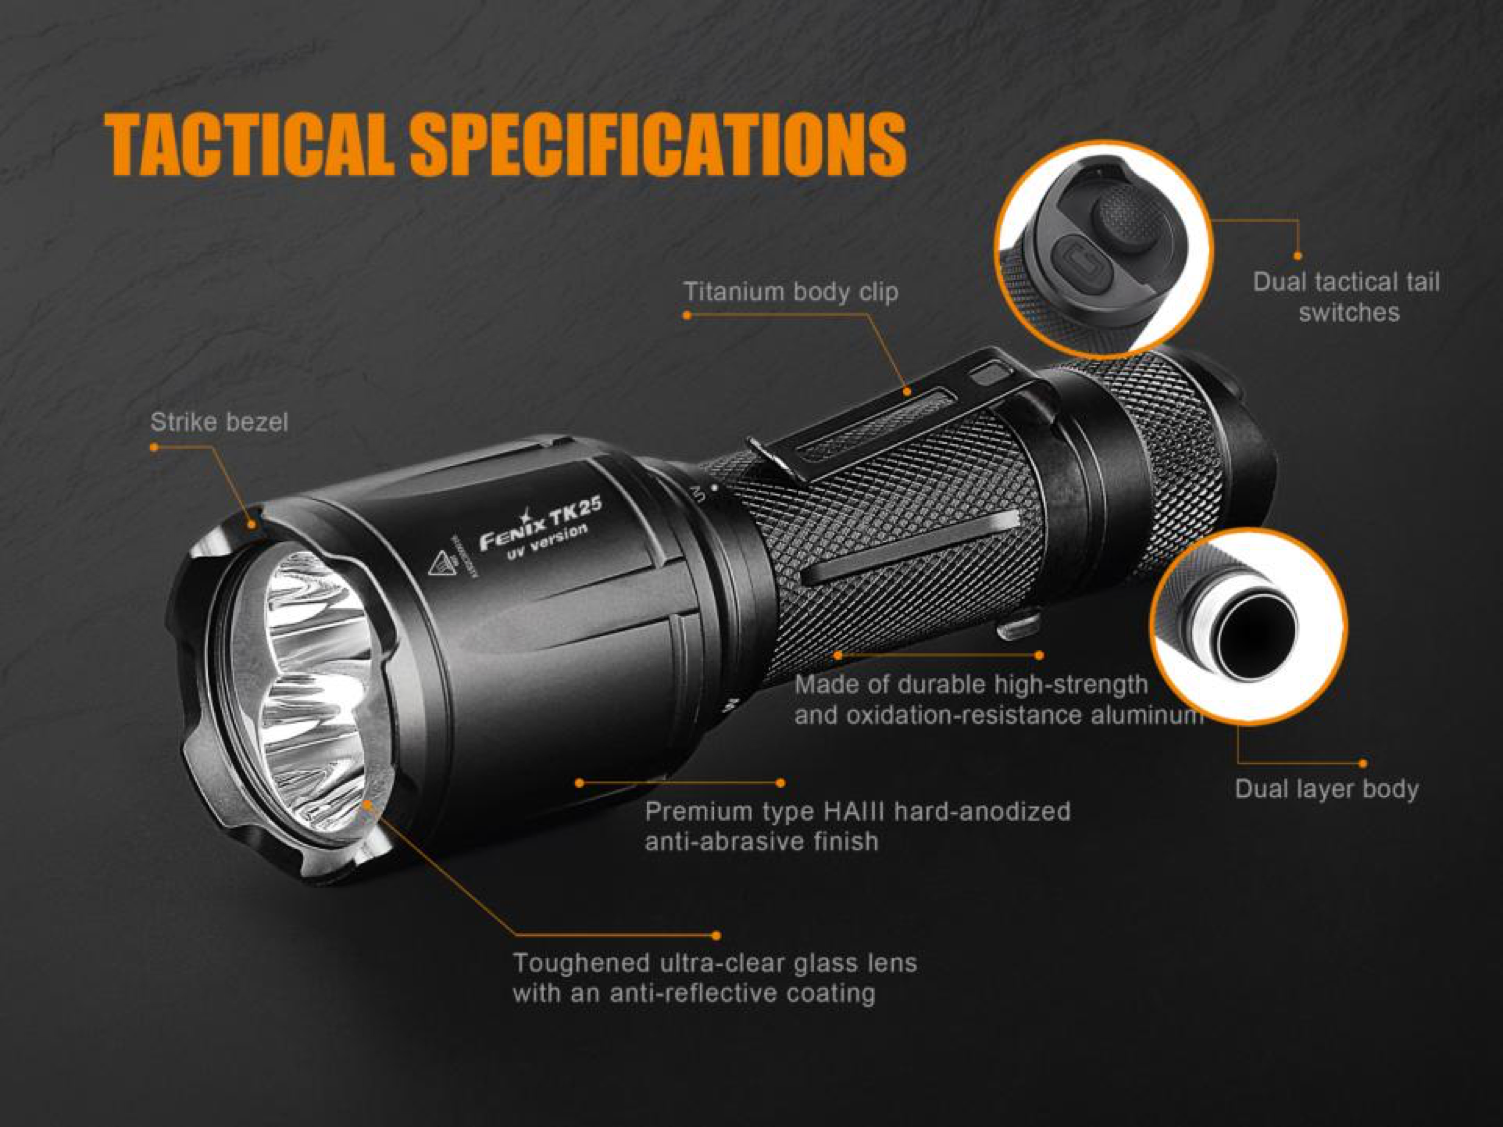 Fenix TK25UV LED Flashlight, UV Torch in India, White + Ultra Violet LEDs, Specially designed for Law enforcement policing department, One switch operation tactical LED Flashlight in India, Powerful LED Torch